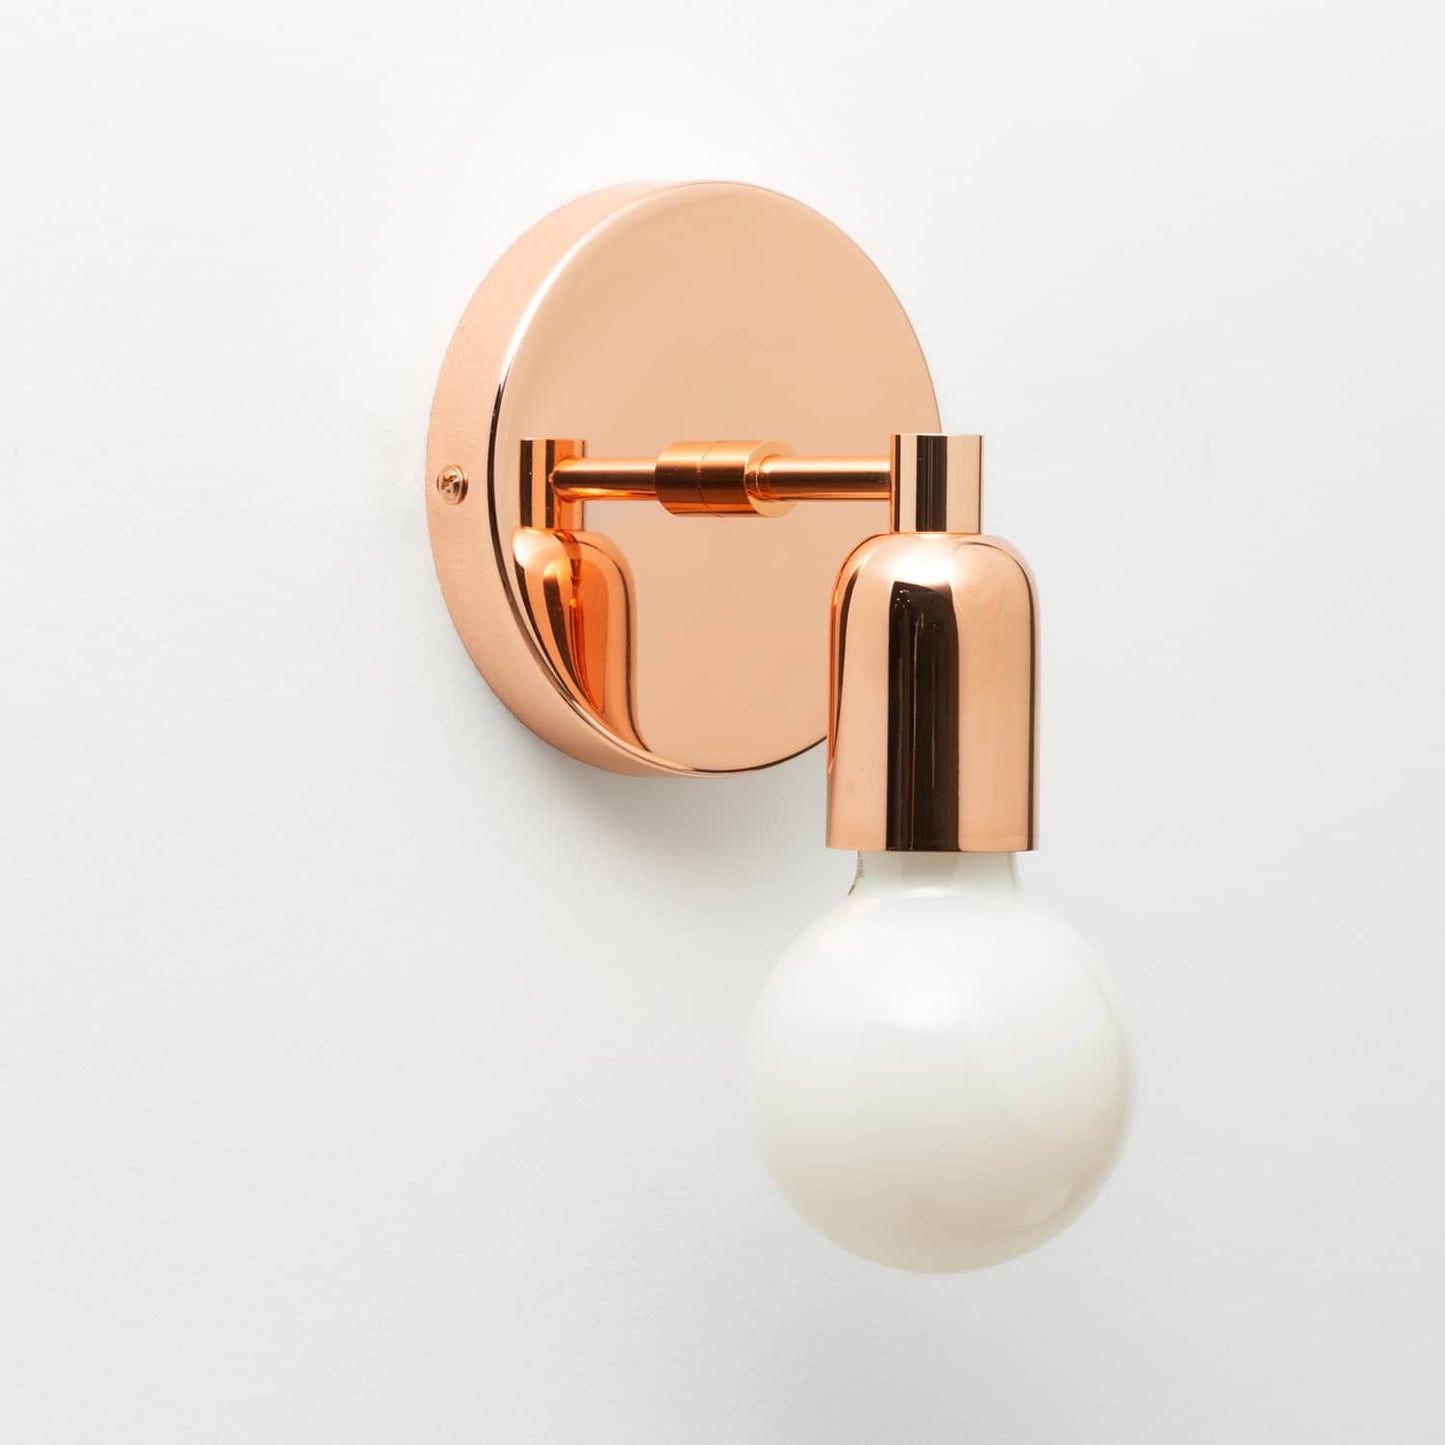 Junction Mini Solo Sconce in Polished Copper finish pictured with a G25 light bulb